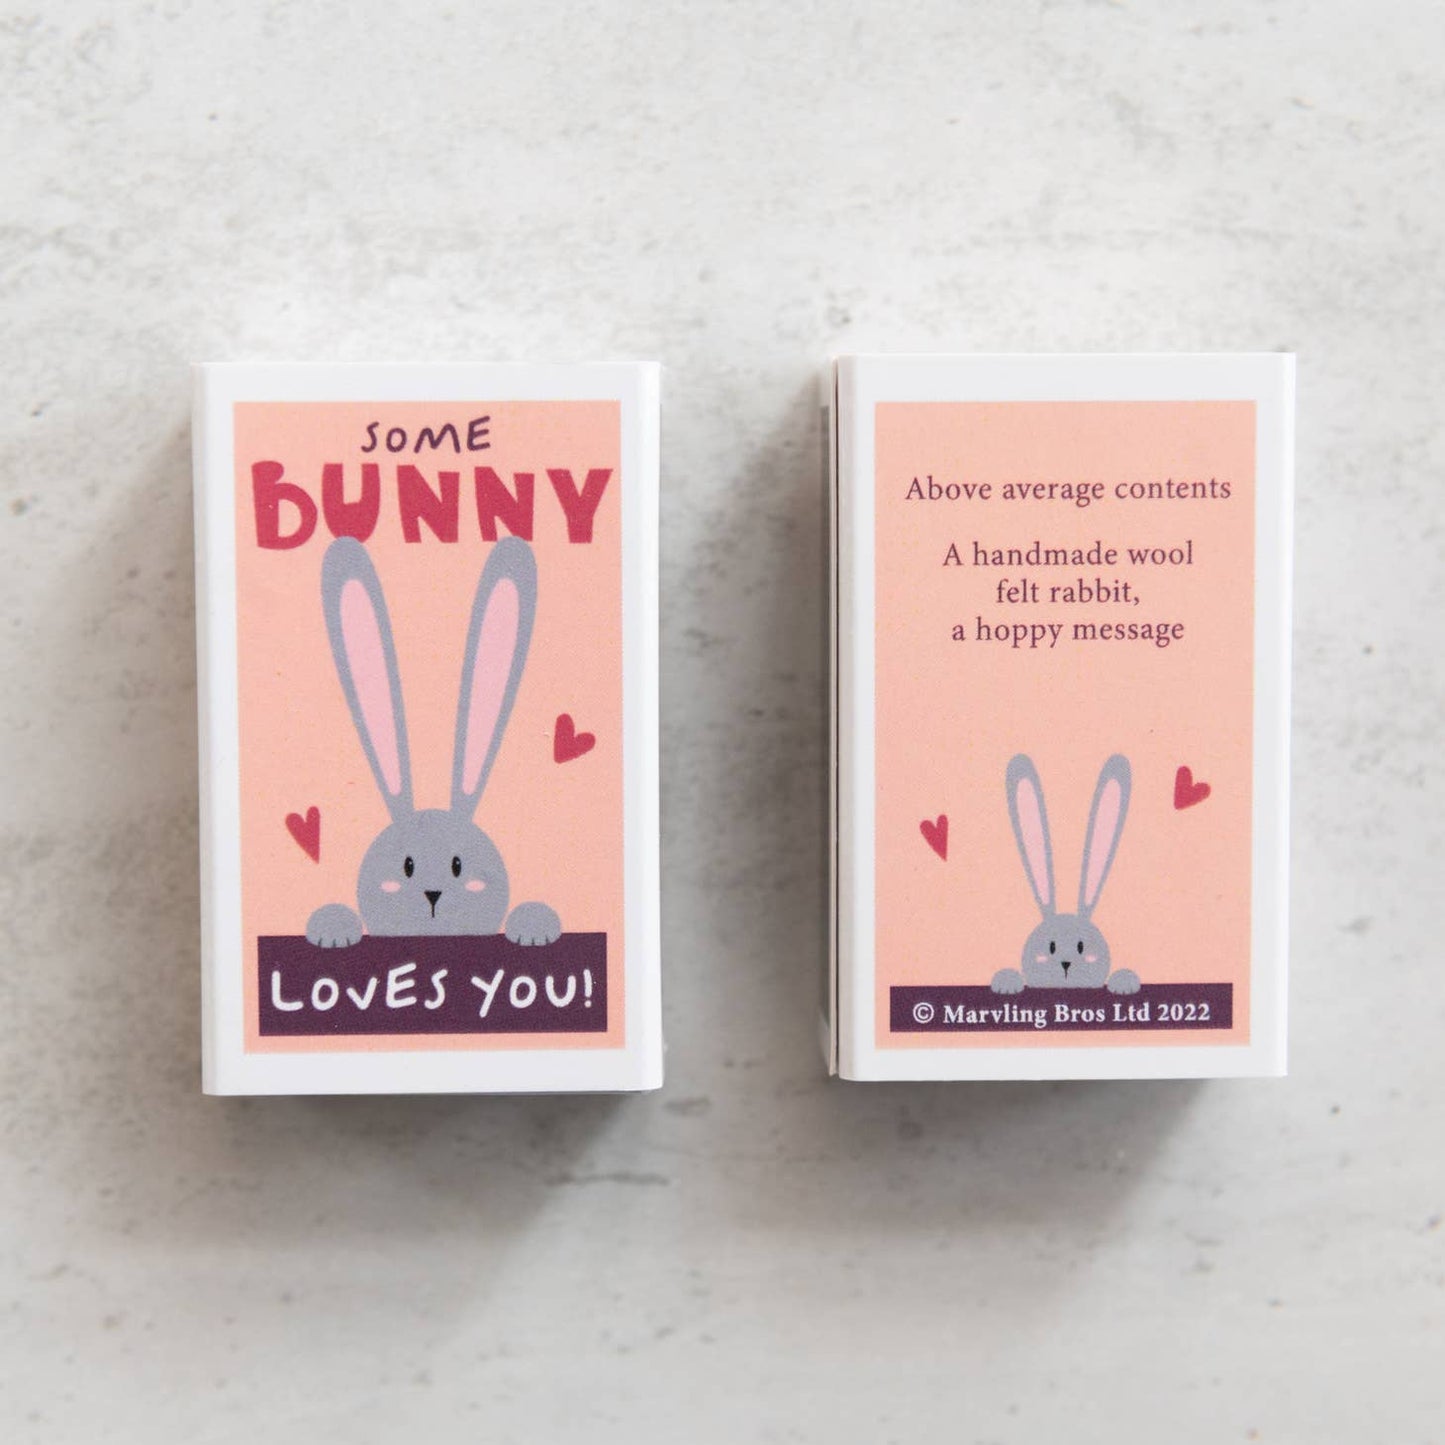 Some Bunny Loves You Wool Felt Rabbit In A Matchbox